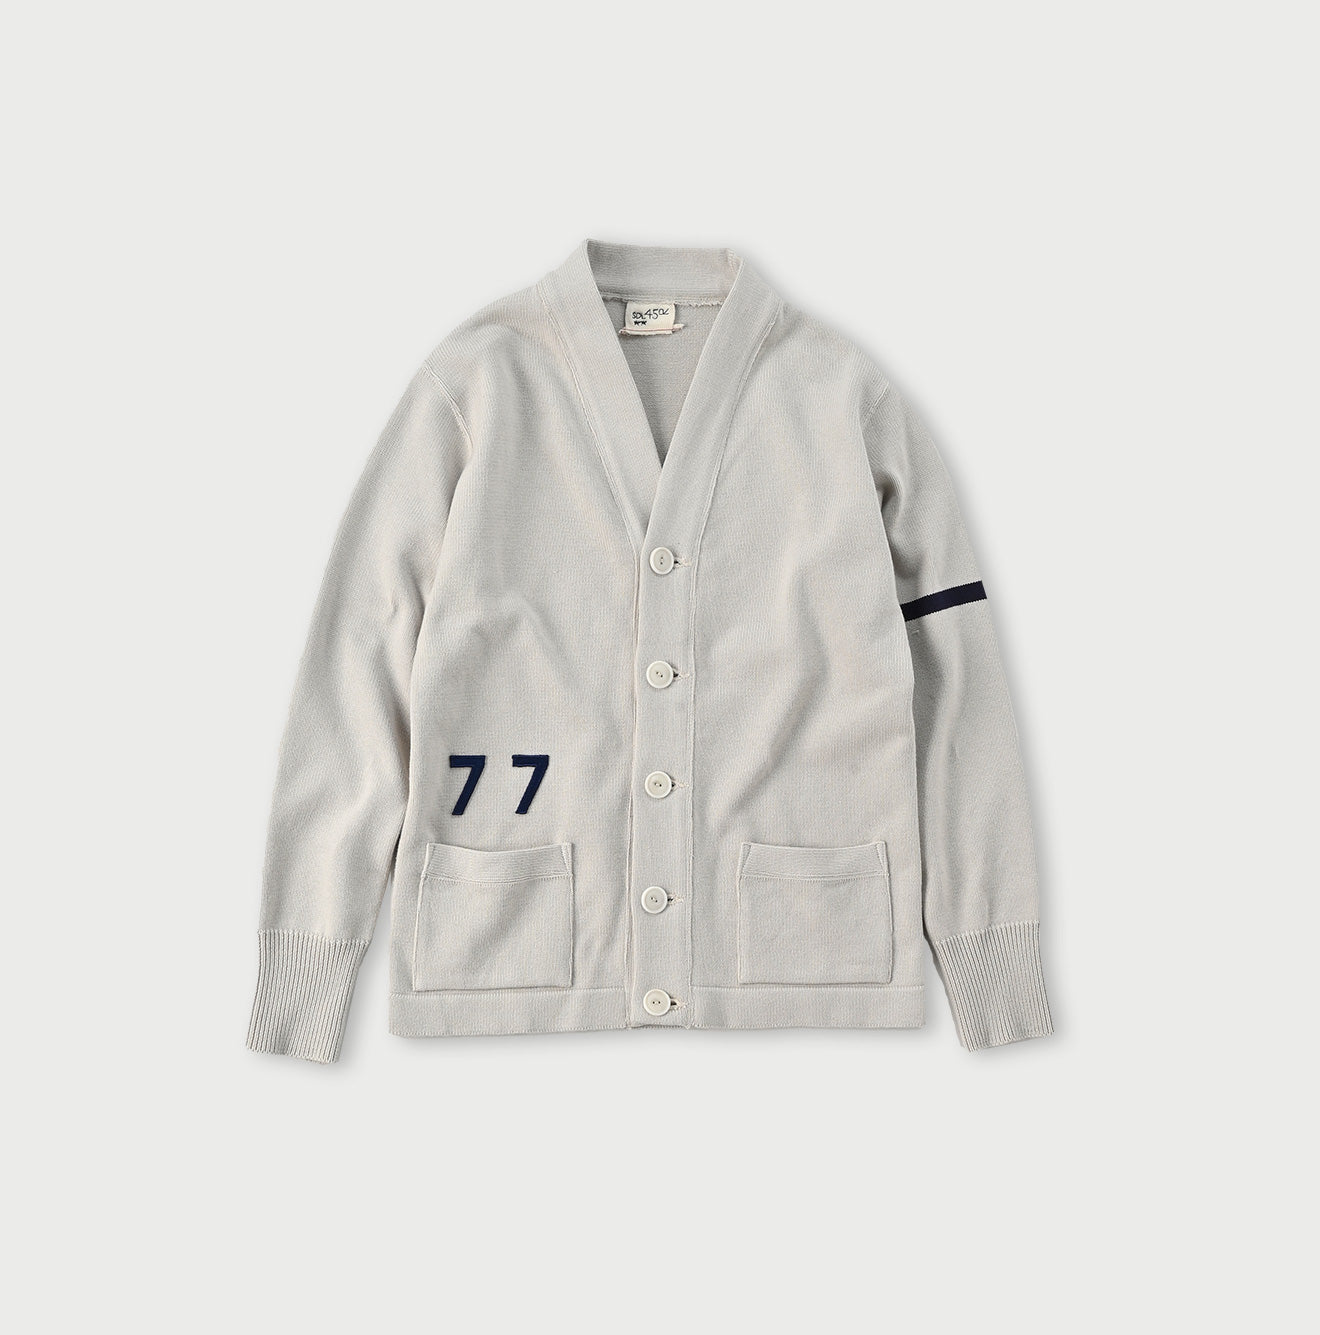 45R 77 Knit-sewn 908 Lettered Cardigan